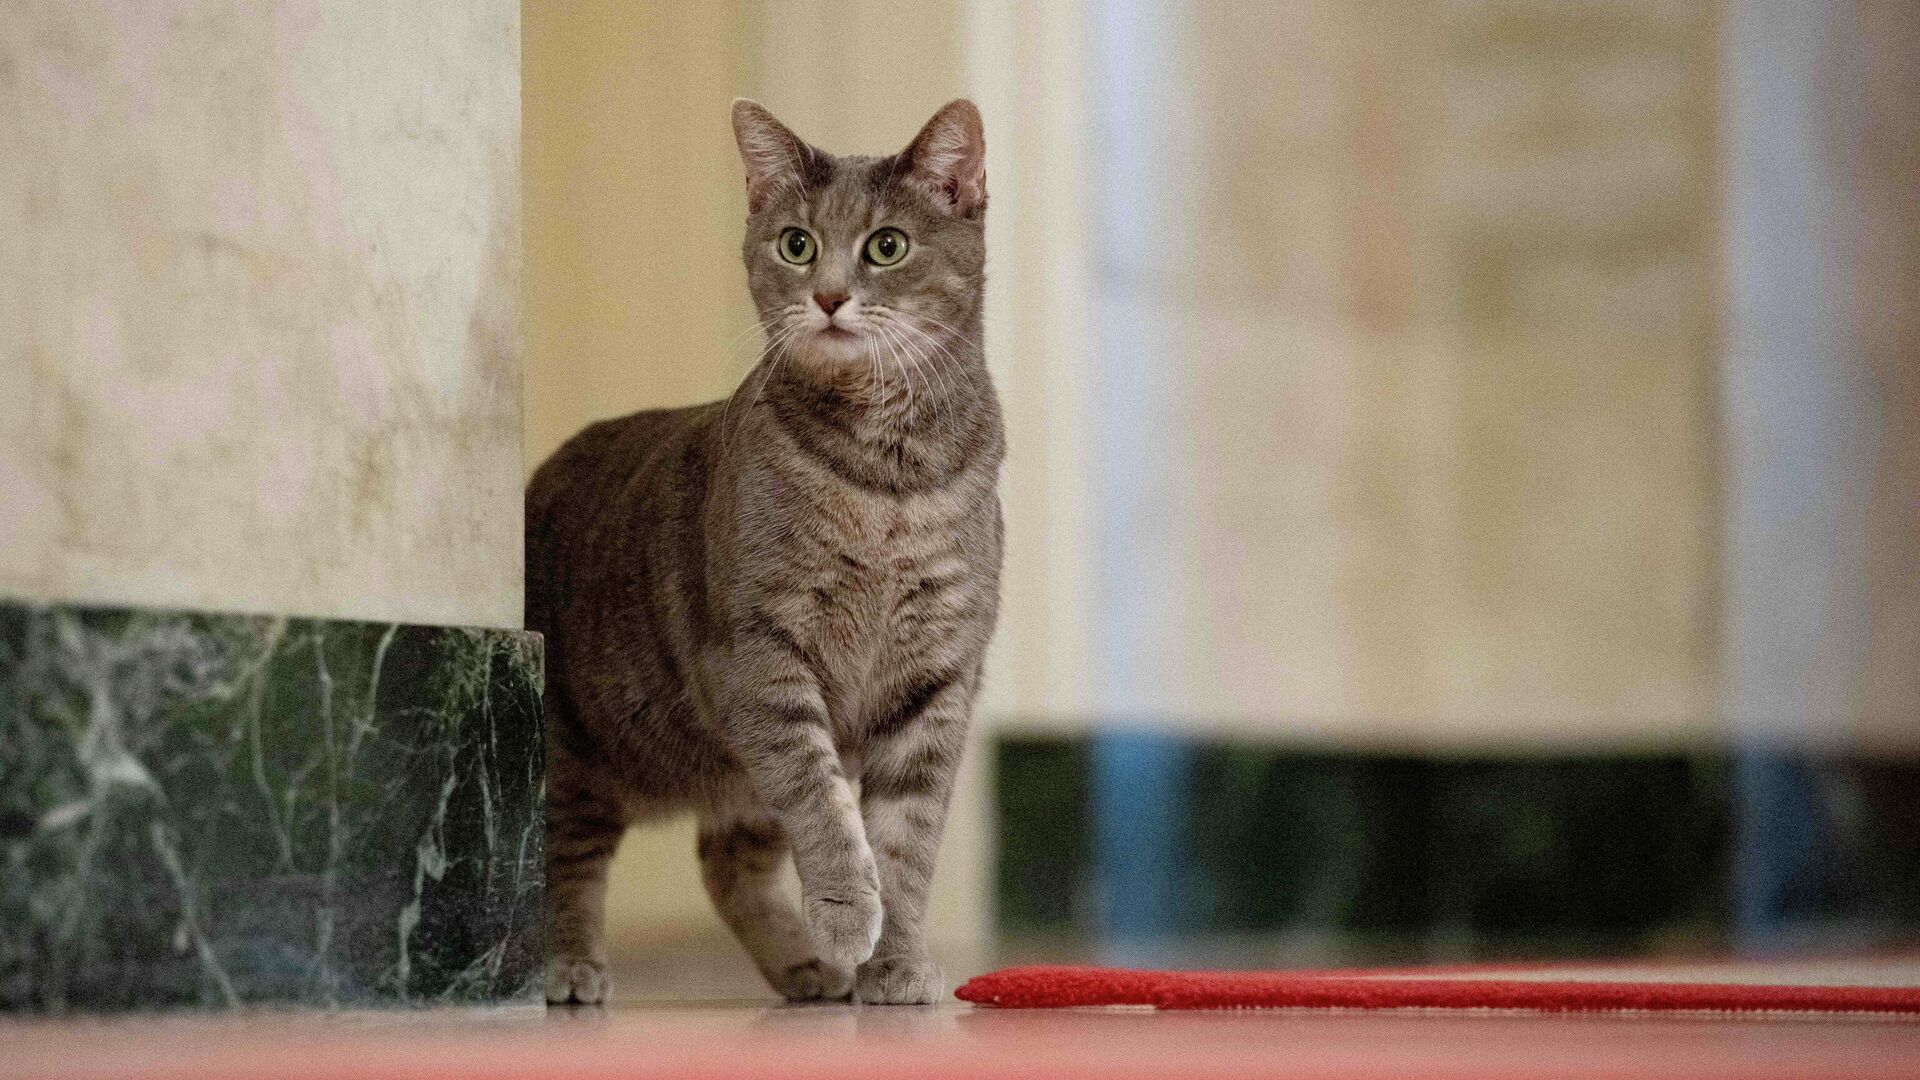 Willow, U.S. President Joe Biden and first lady Jill Biden’s new pet cat, is seen in a White House handout photo as she wanders through the halls of the White House in Washington, U.S., January 27, 2022. Picture taken January 27, 2022. - Sputnik International, 1920, 02.02.2022